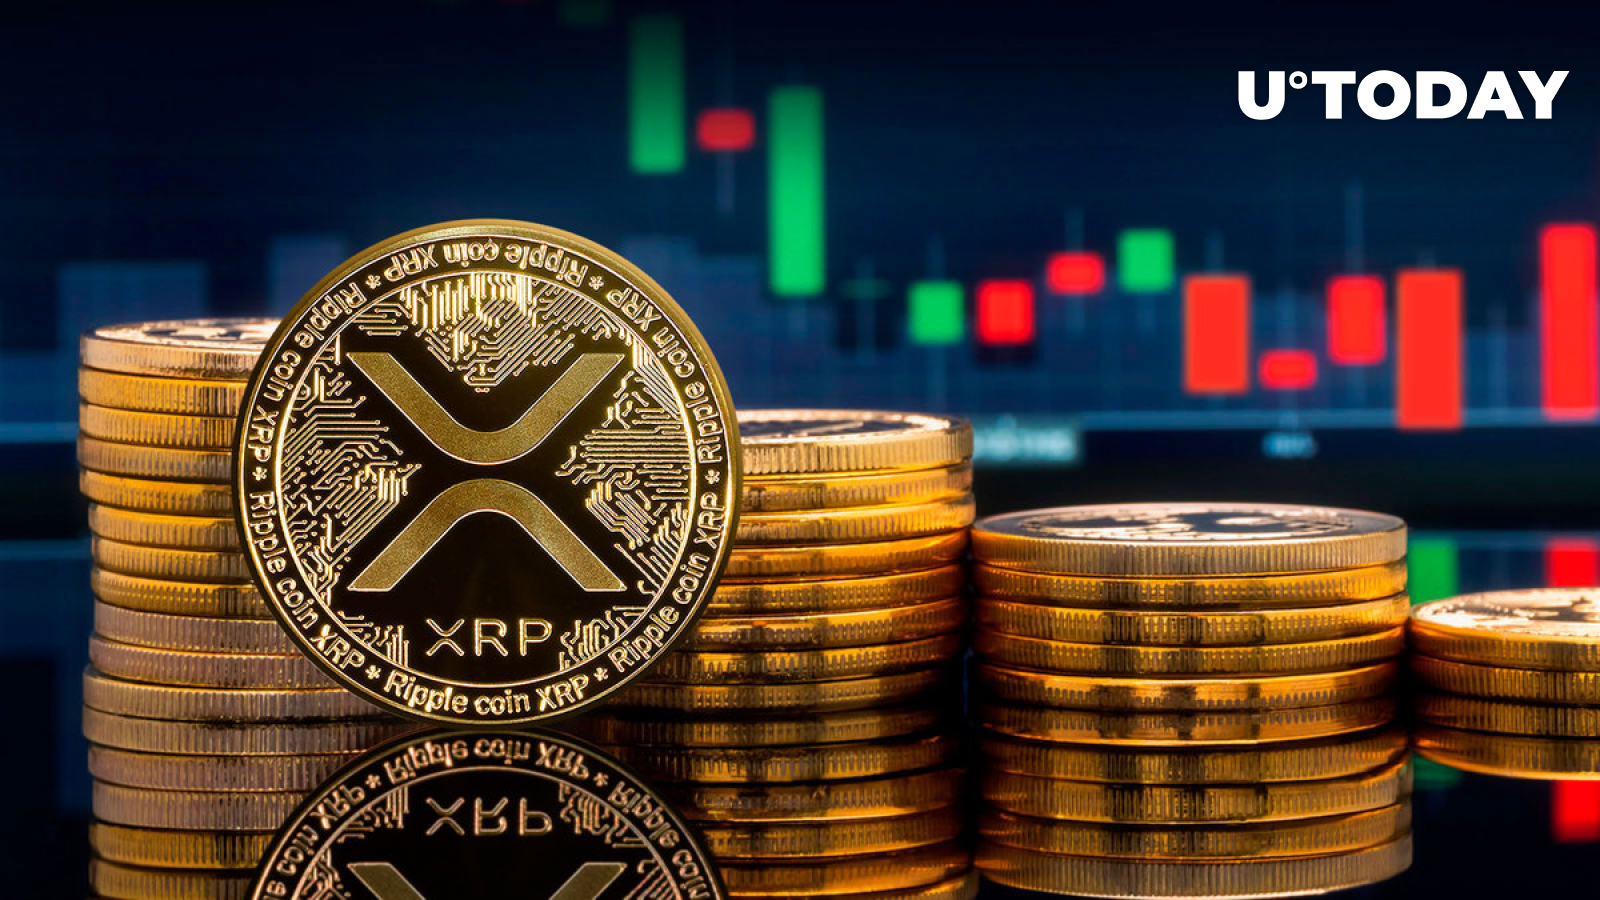 Ripple Sells Millions of XRP at Loss as Price Goes Down